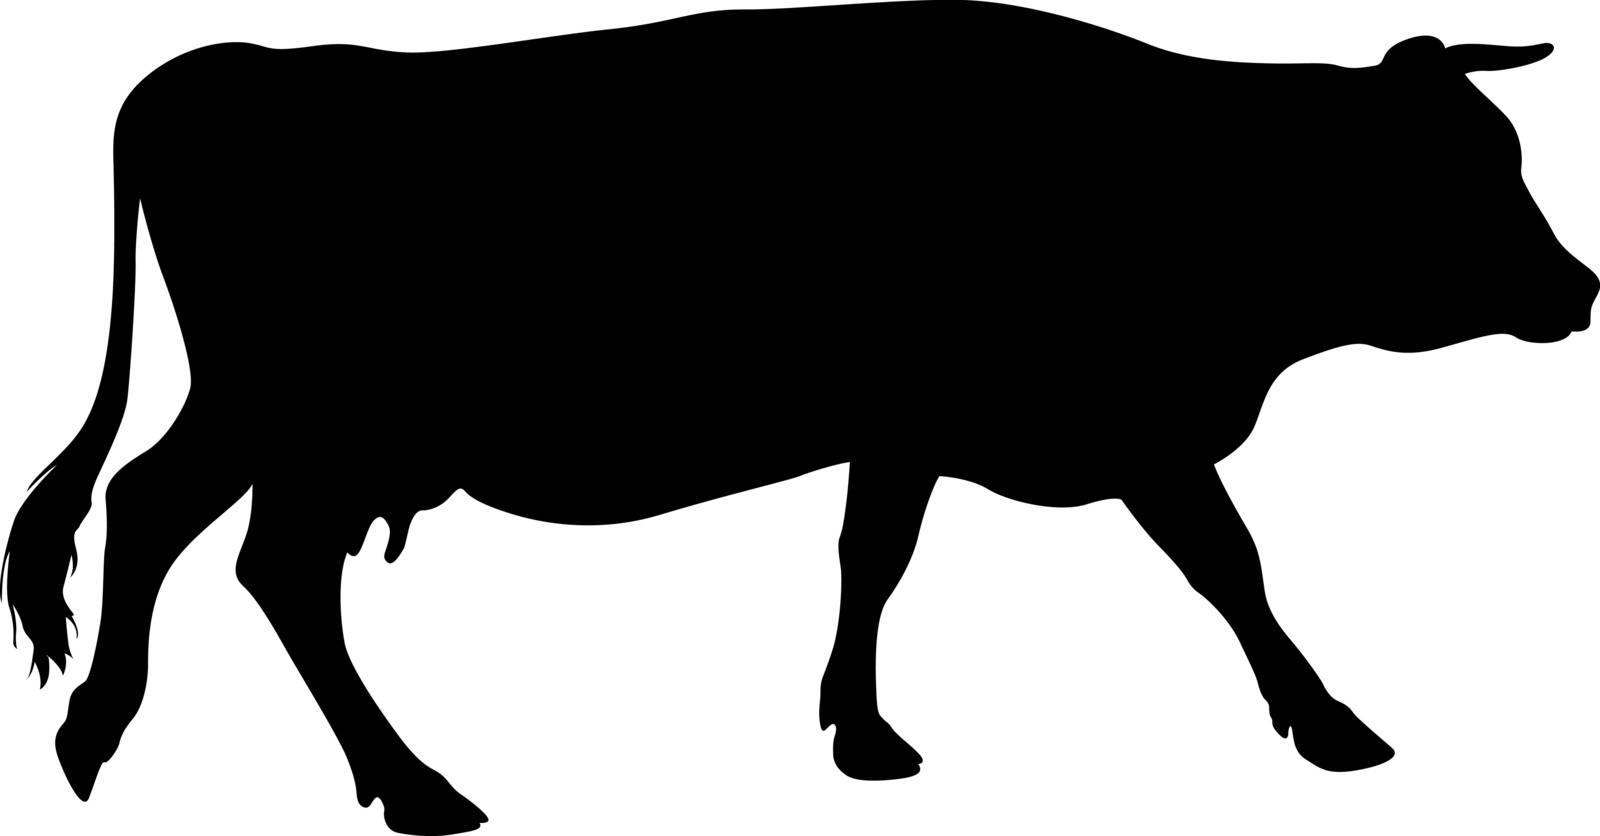 Black silhouette of cash cow on white background by aarrows